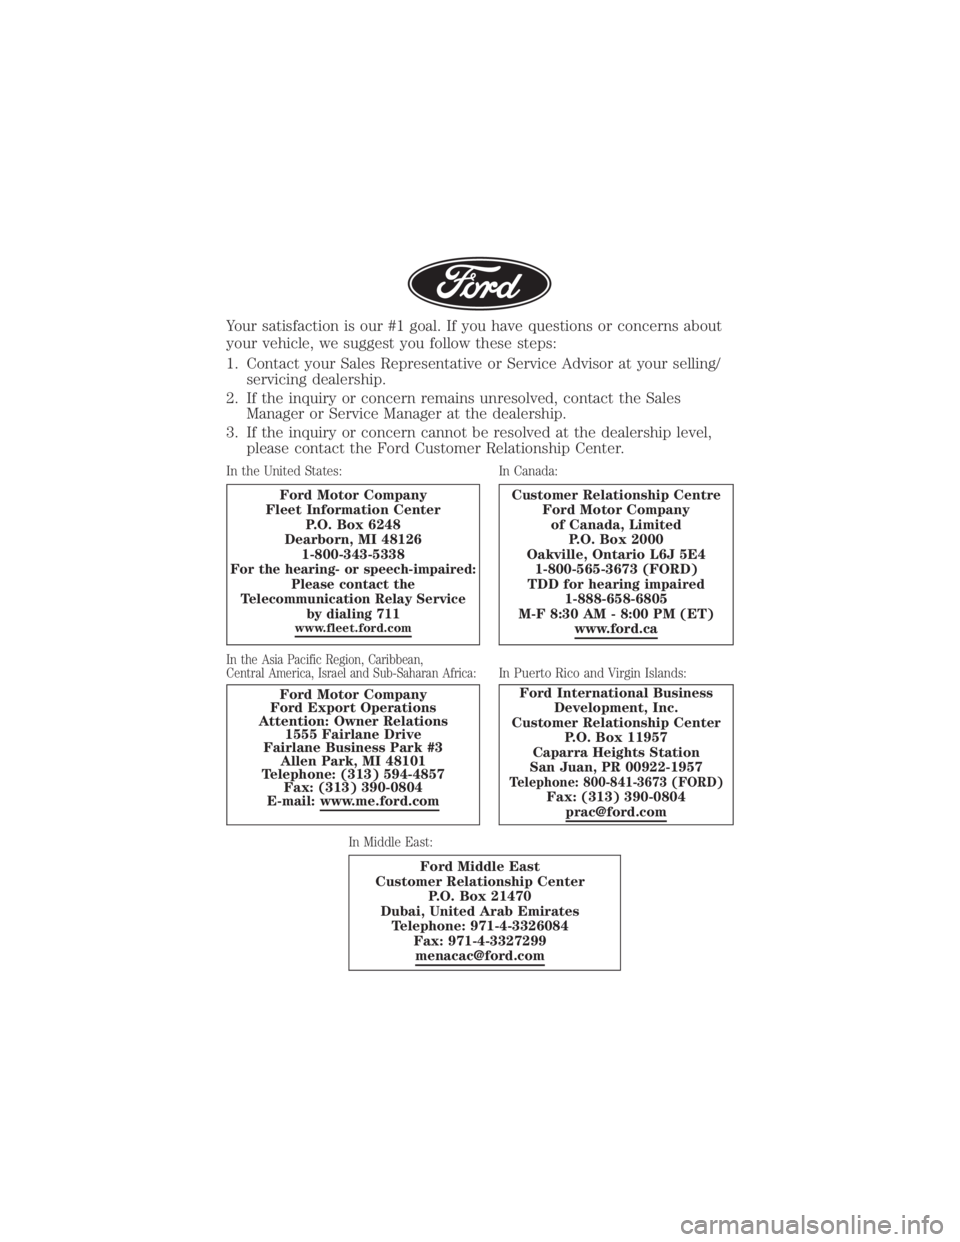 FORD F-59 2021  Warranty Guide Your satisfaction is our #1 goal. If you have questions or concerns about
your vehicle, we suggest you follow these steps:
1. Contact your Sales Representative or Service Advisor at your selling/servi